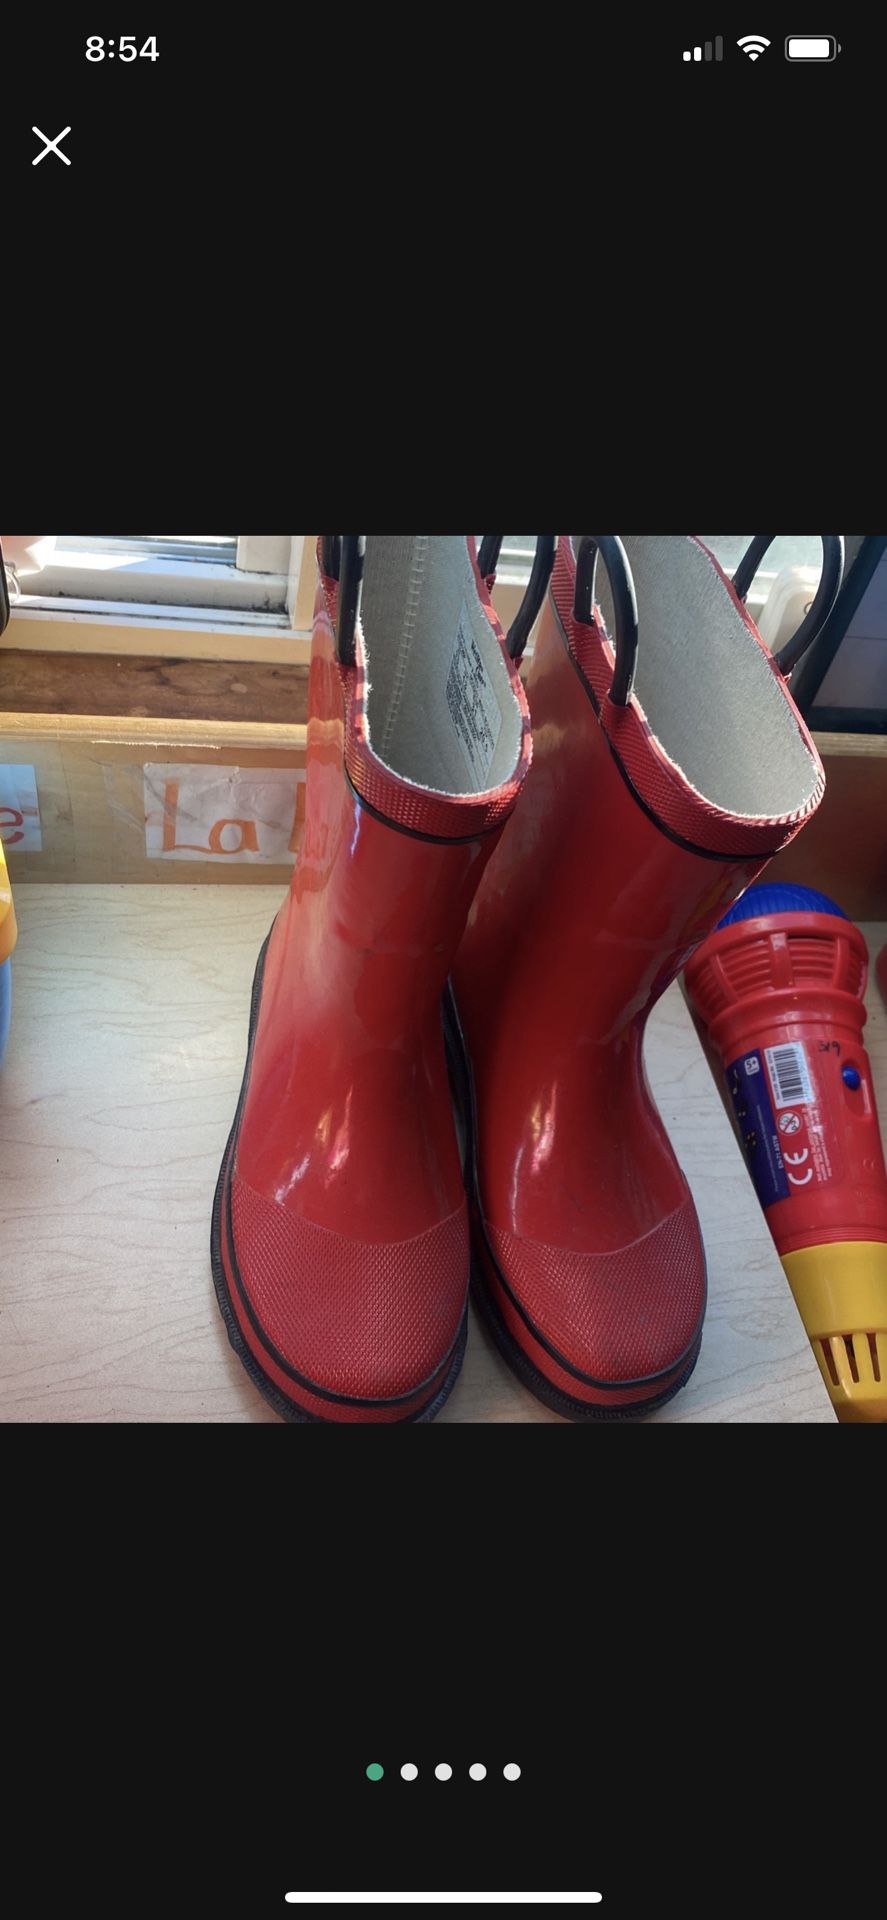 Kids Rain Boots Size 13 Perfect For Outdoors 